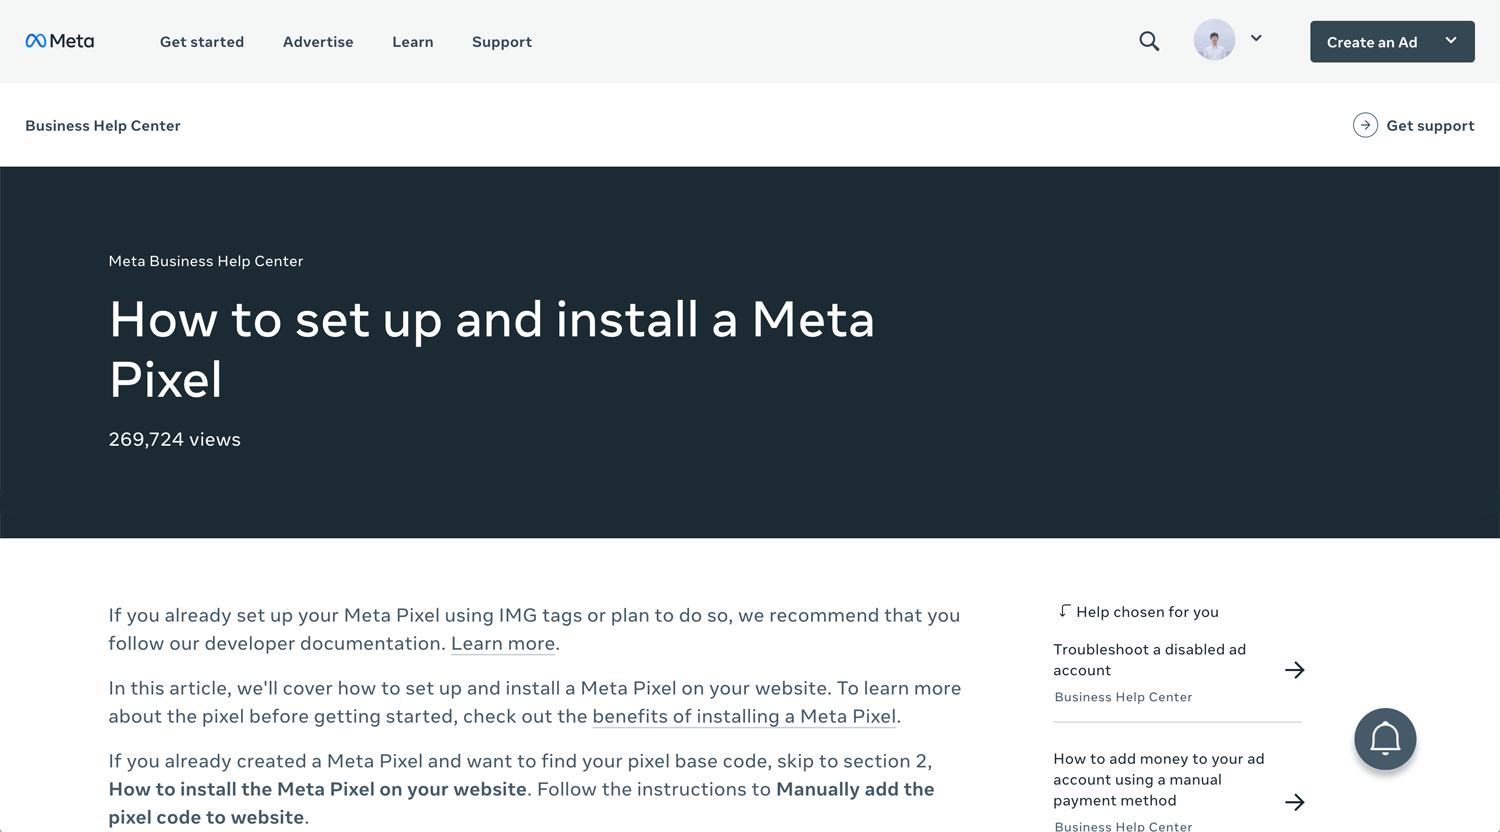 How to set up and install a Meta Pixel